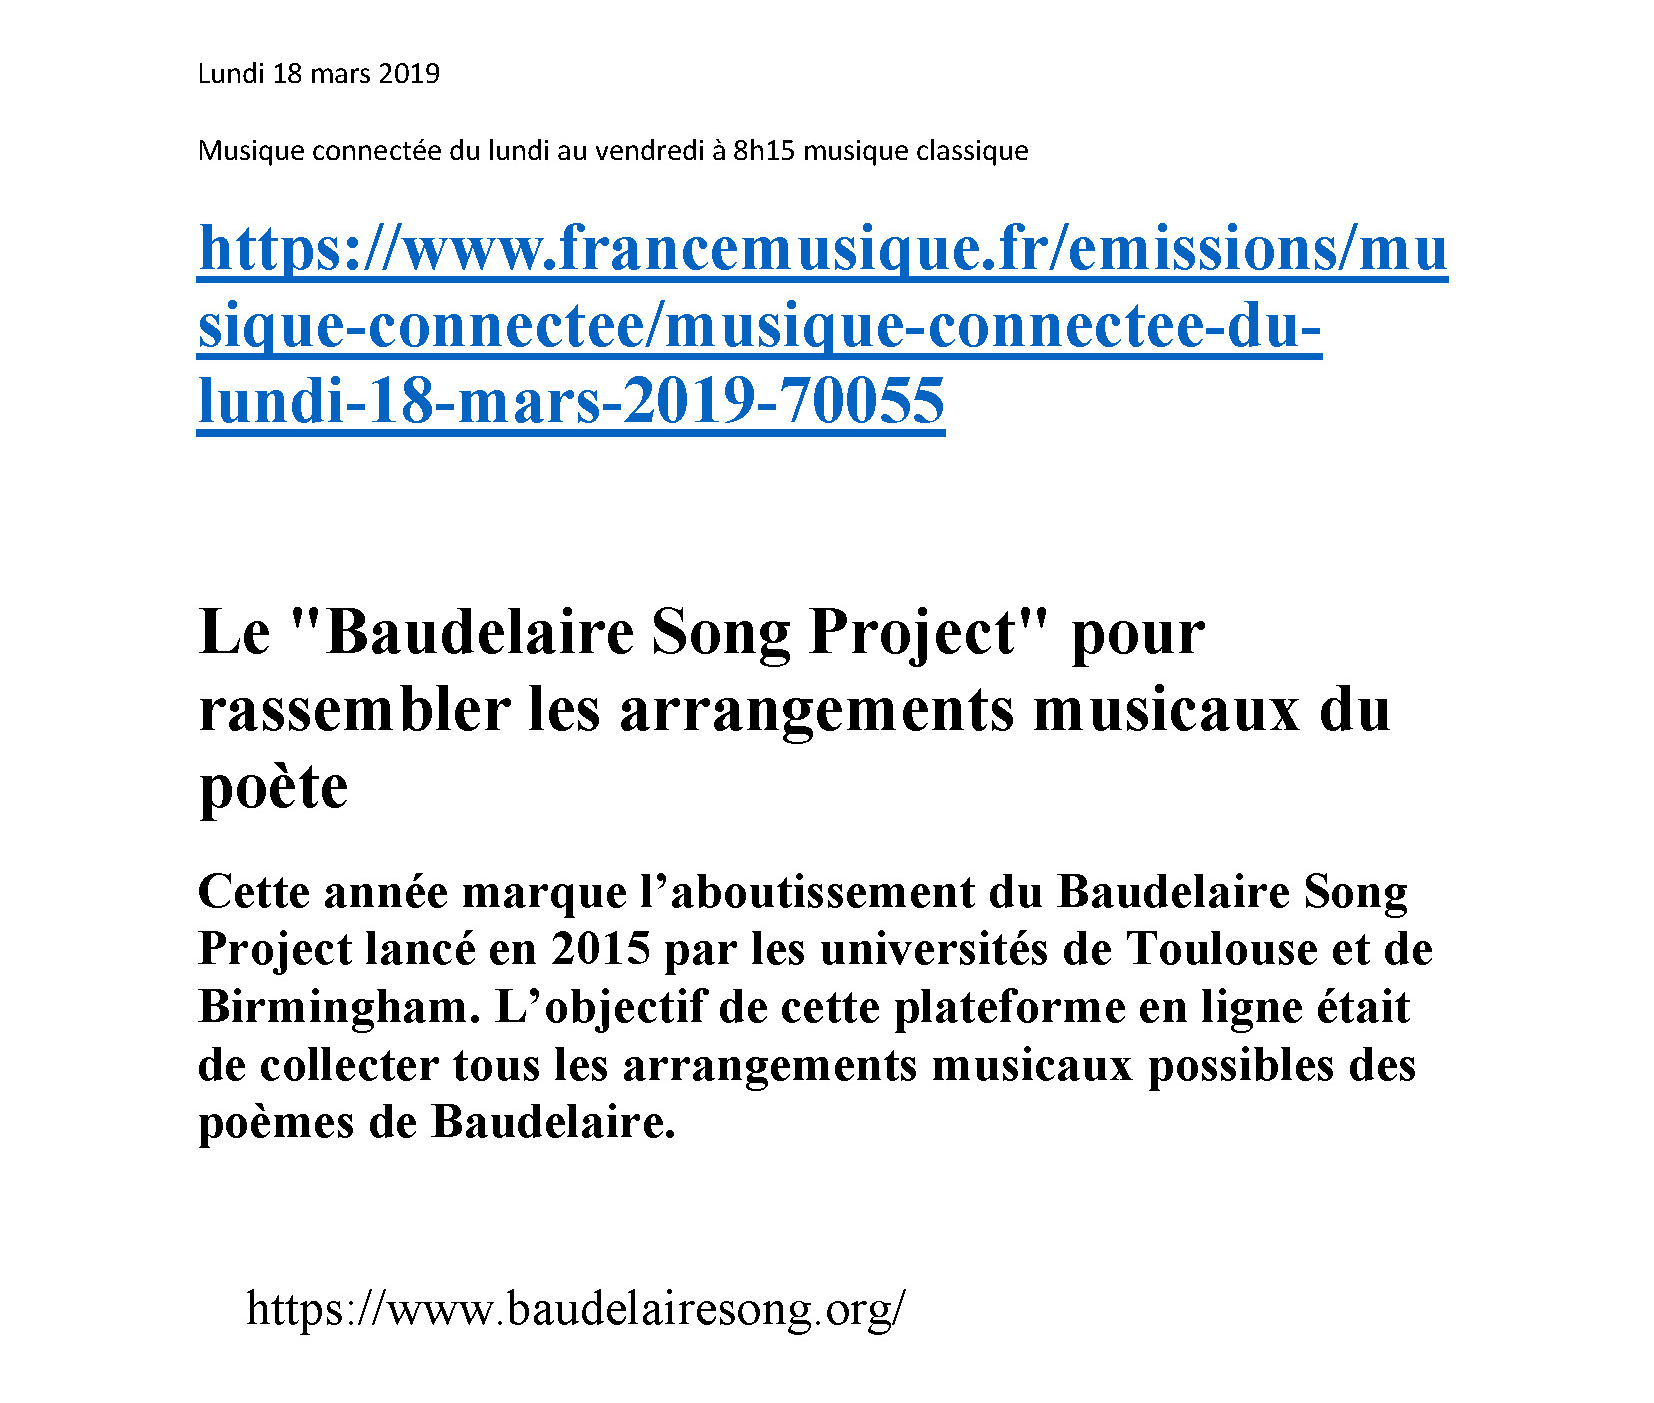   18/03/2019 Baudelaire Song Project